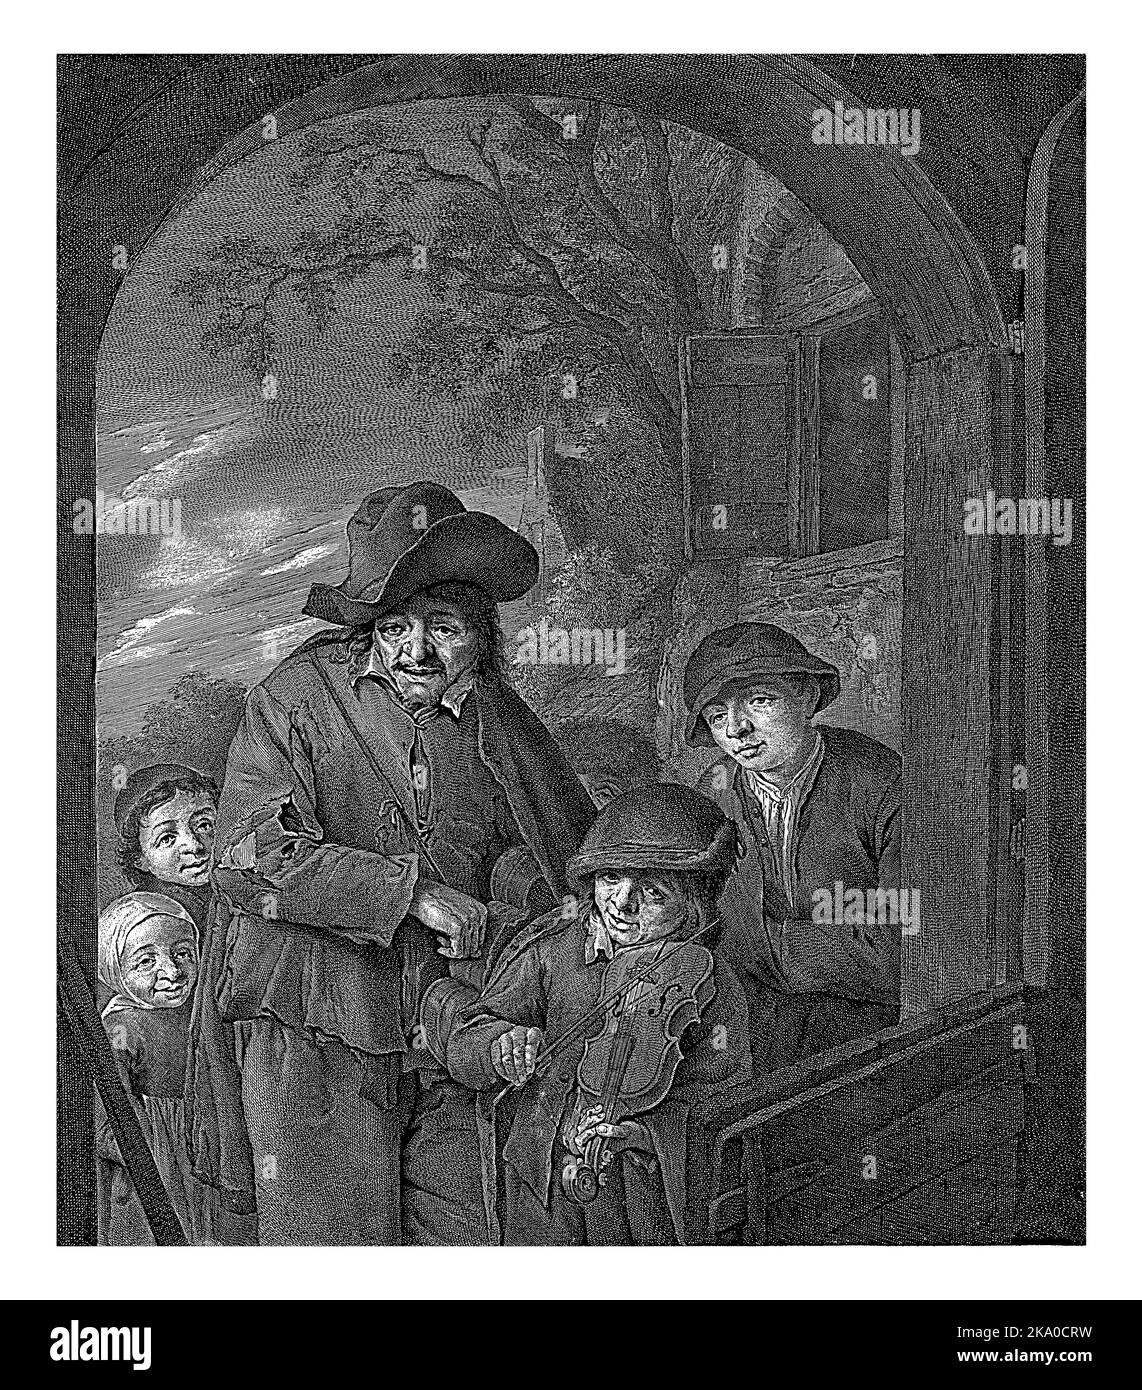 A beggar's family makes music at a doorway. A boy plays the violin and a man in torn clothes plays his hurdy-gurdy. Stock Photo